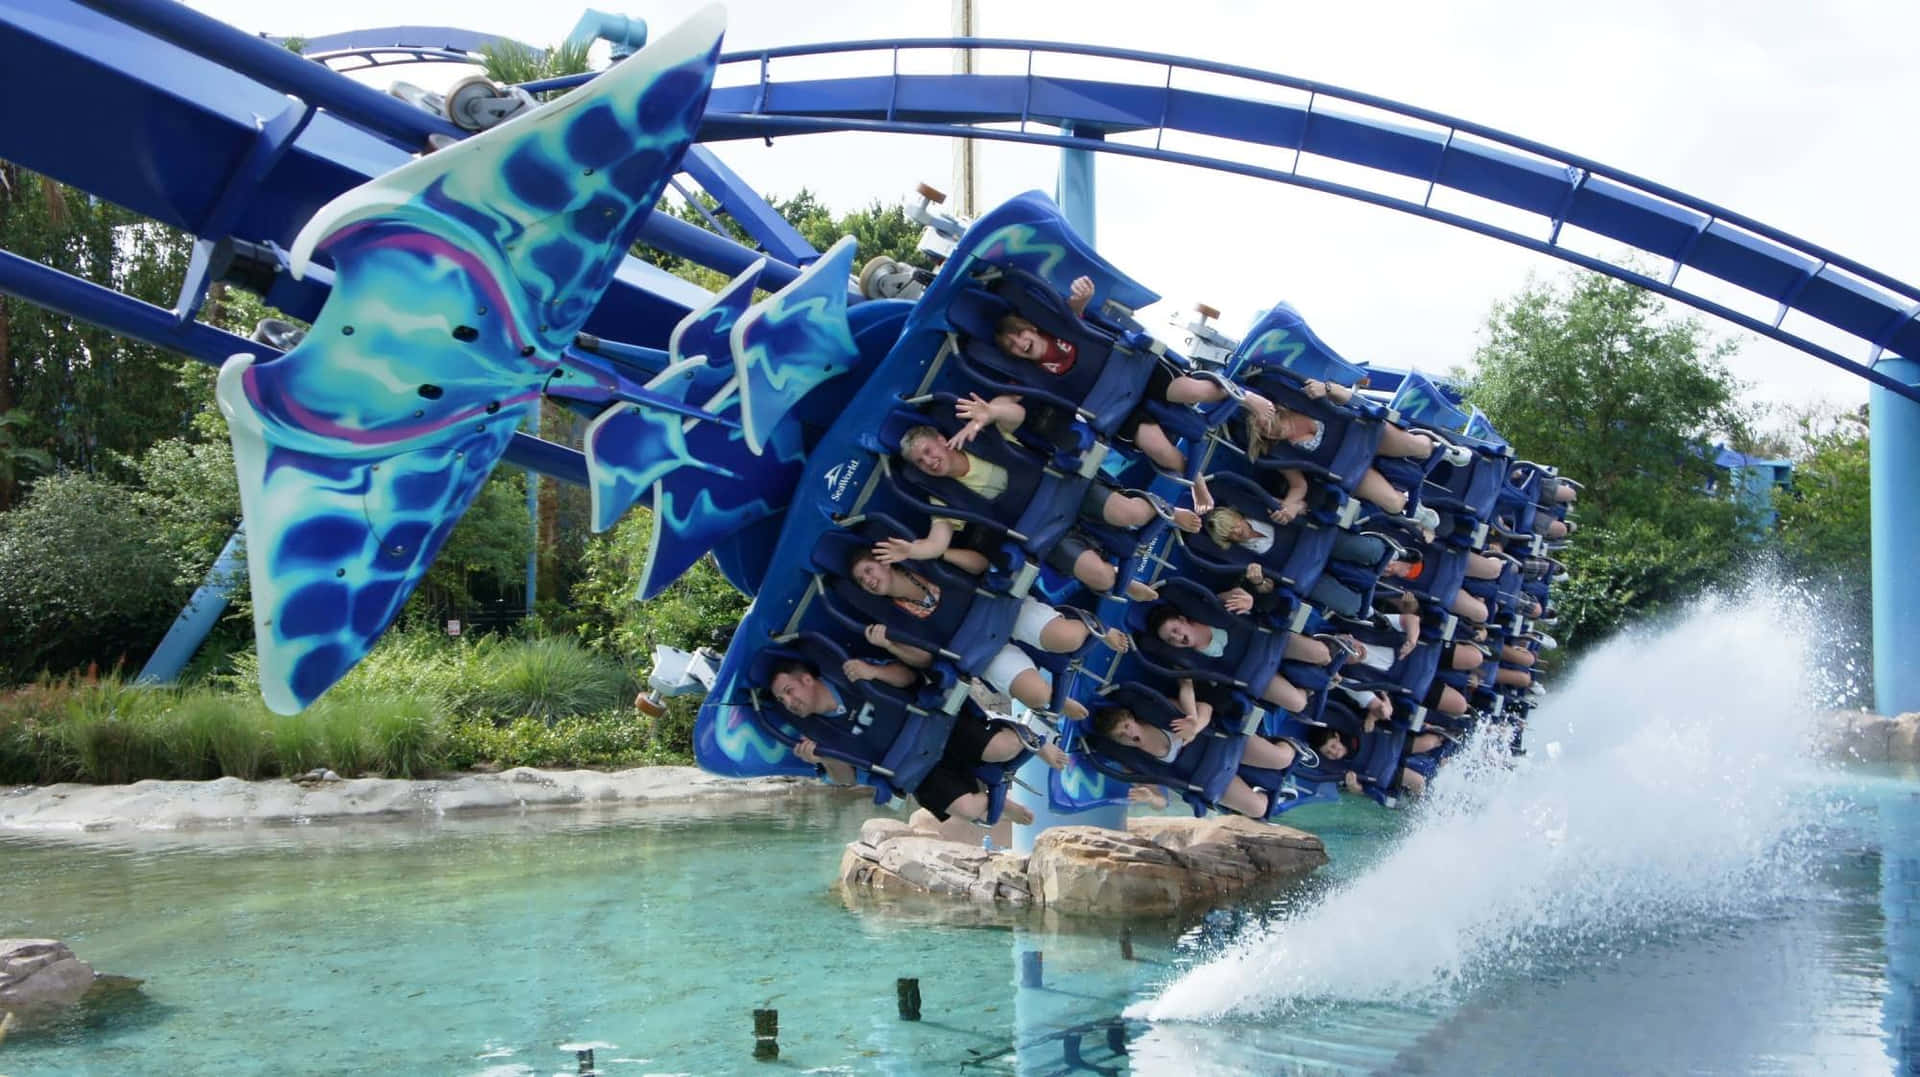 Have a whale of a time at SeaWorld!